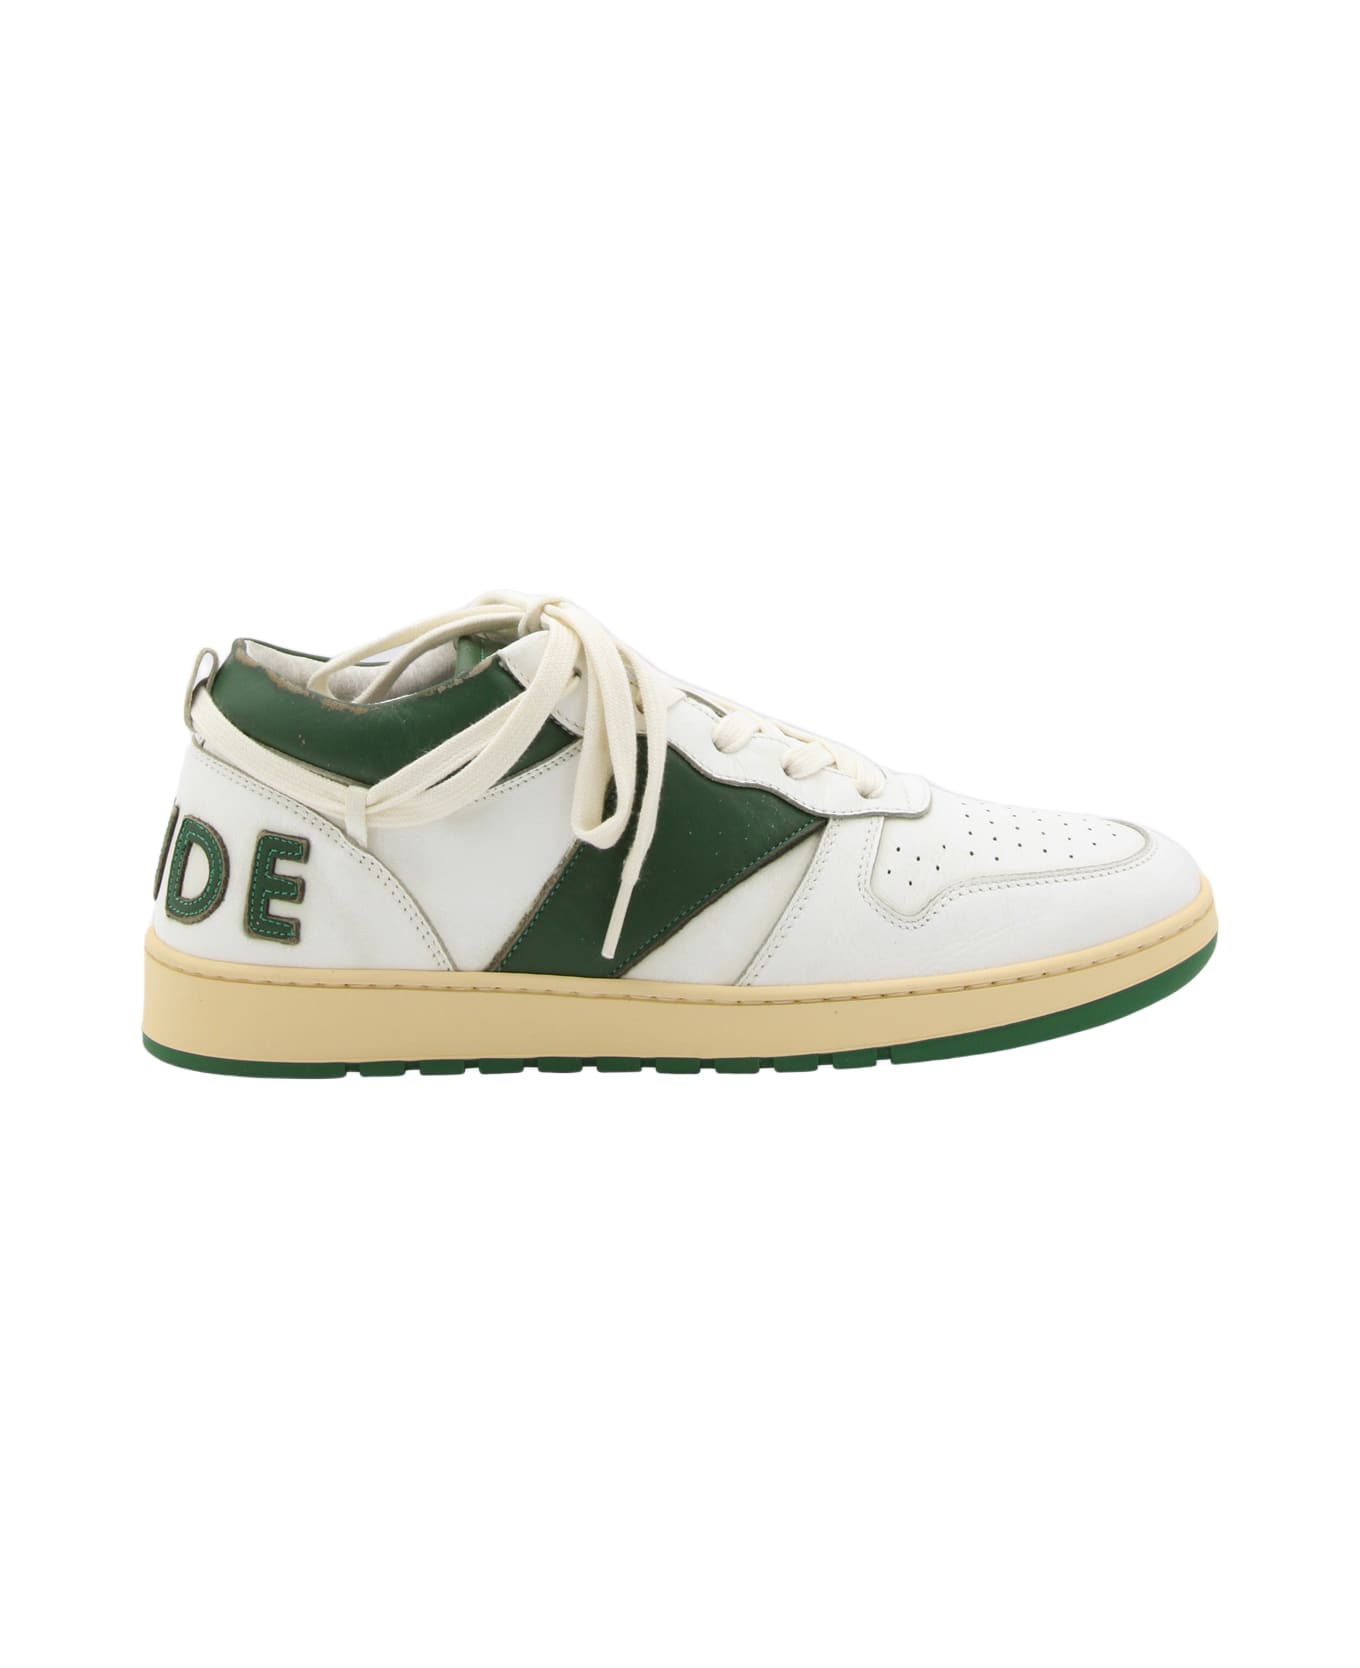 Rhude White And Hunter Green Leather Sneakers - WHITE/HUNTER GREEN